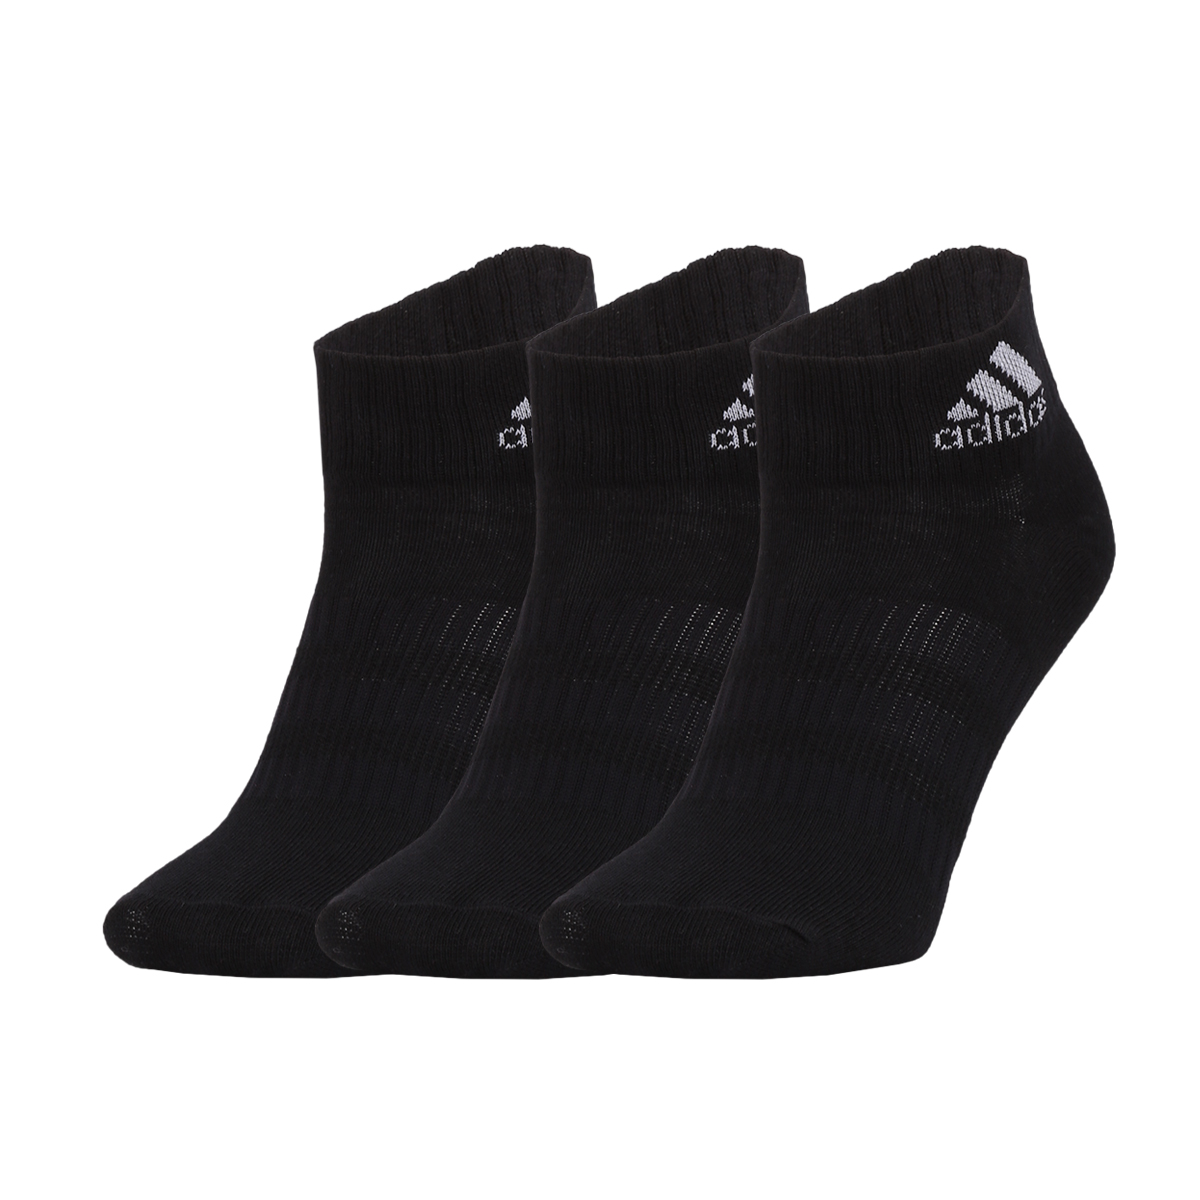 Medias adidas Ankle Light 3 Pares,  image number null